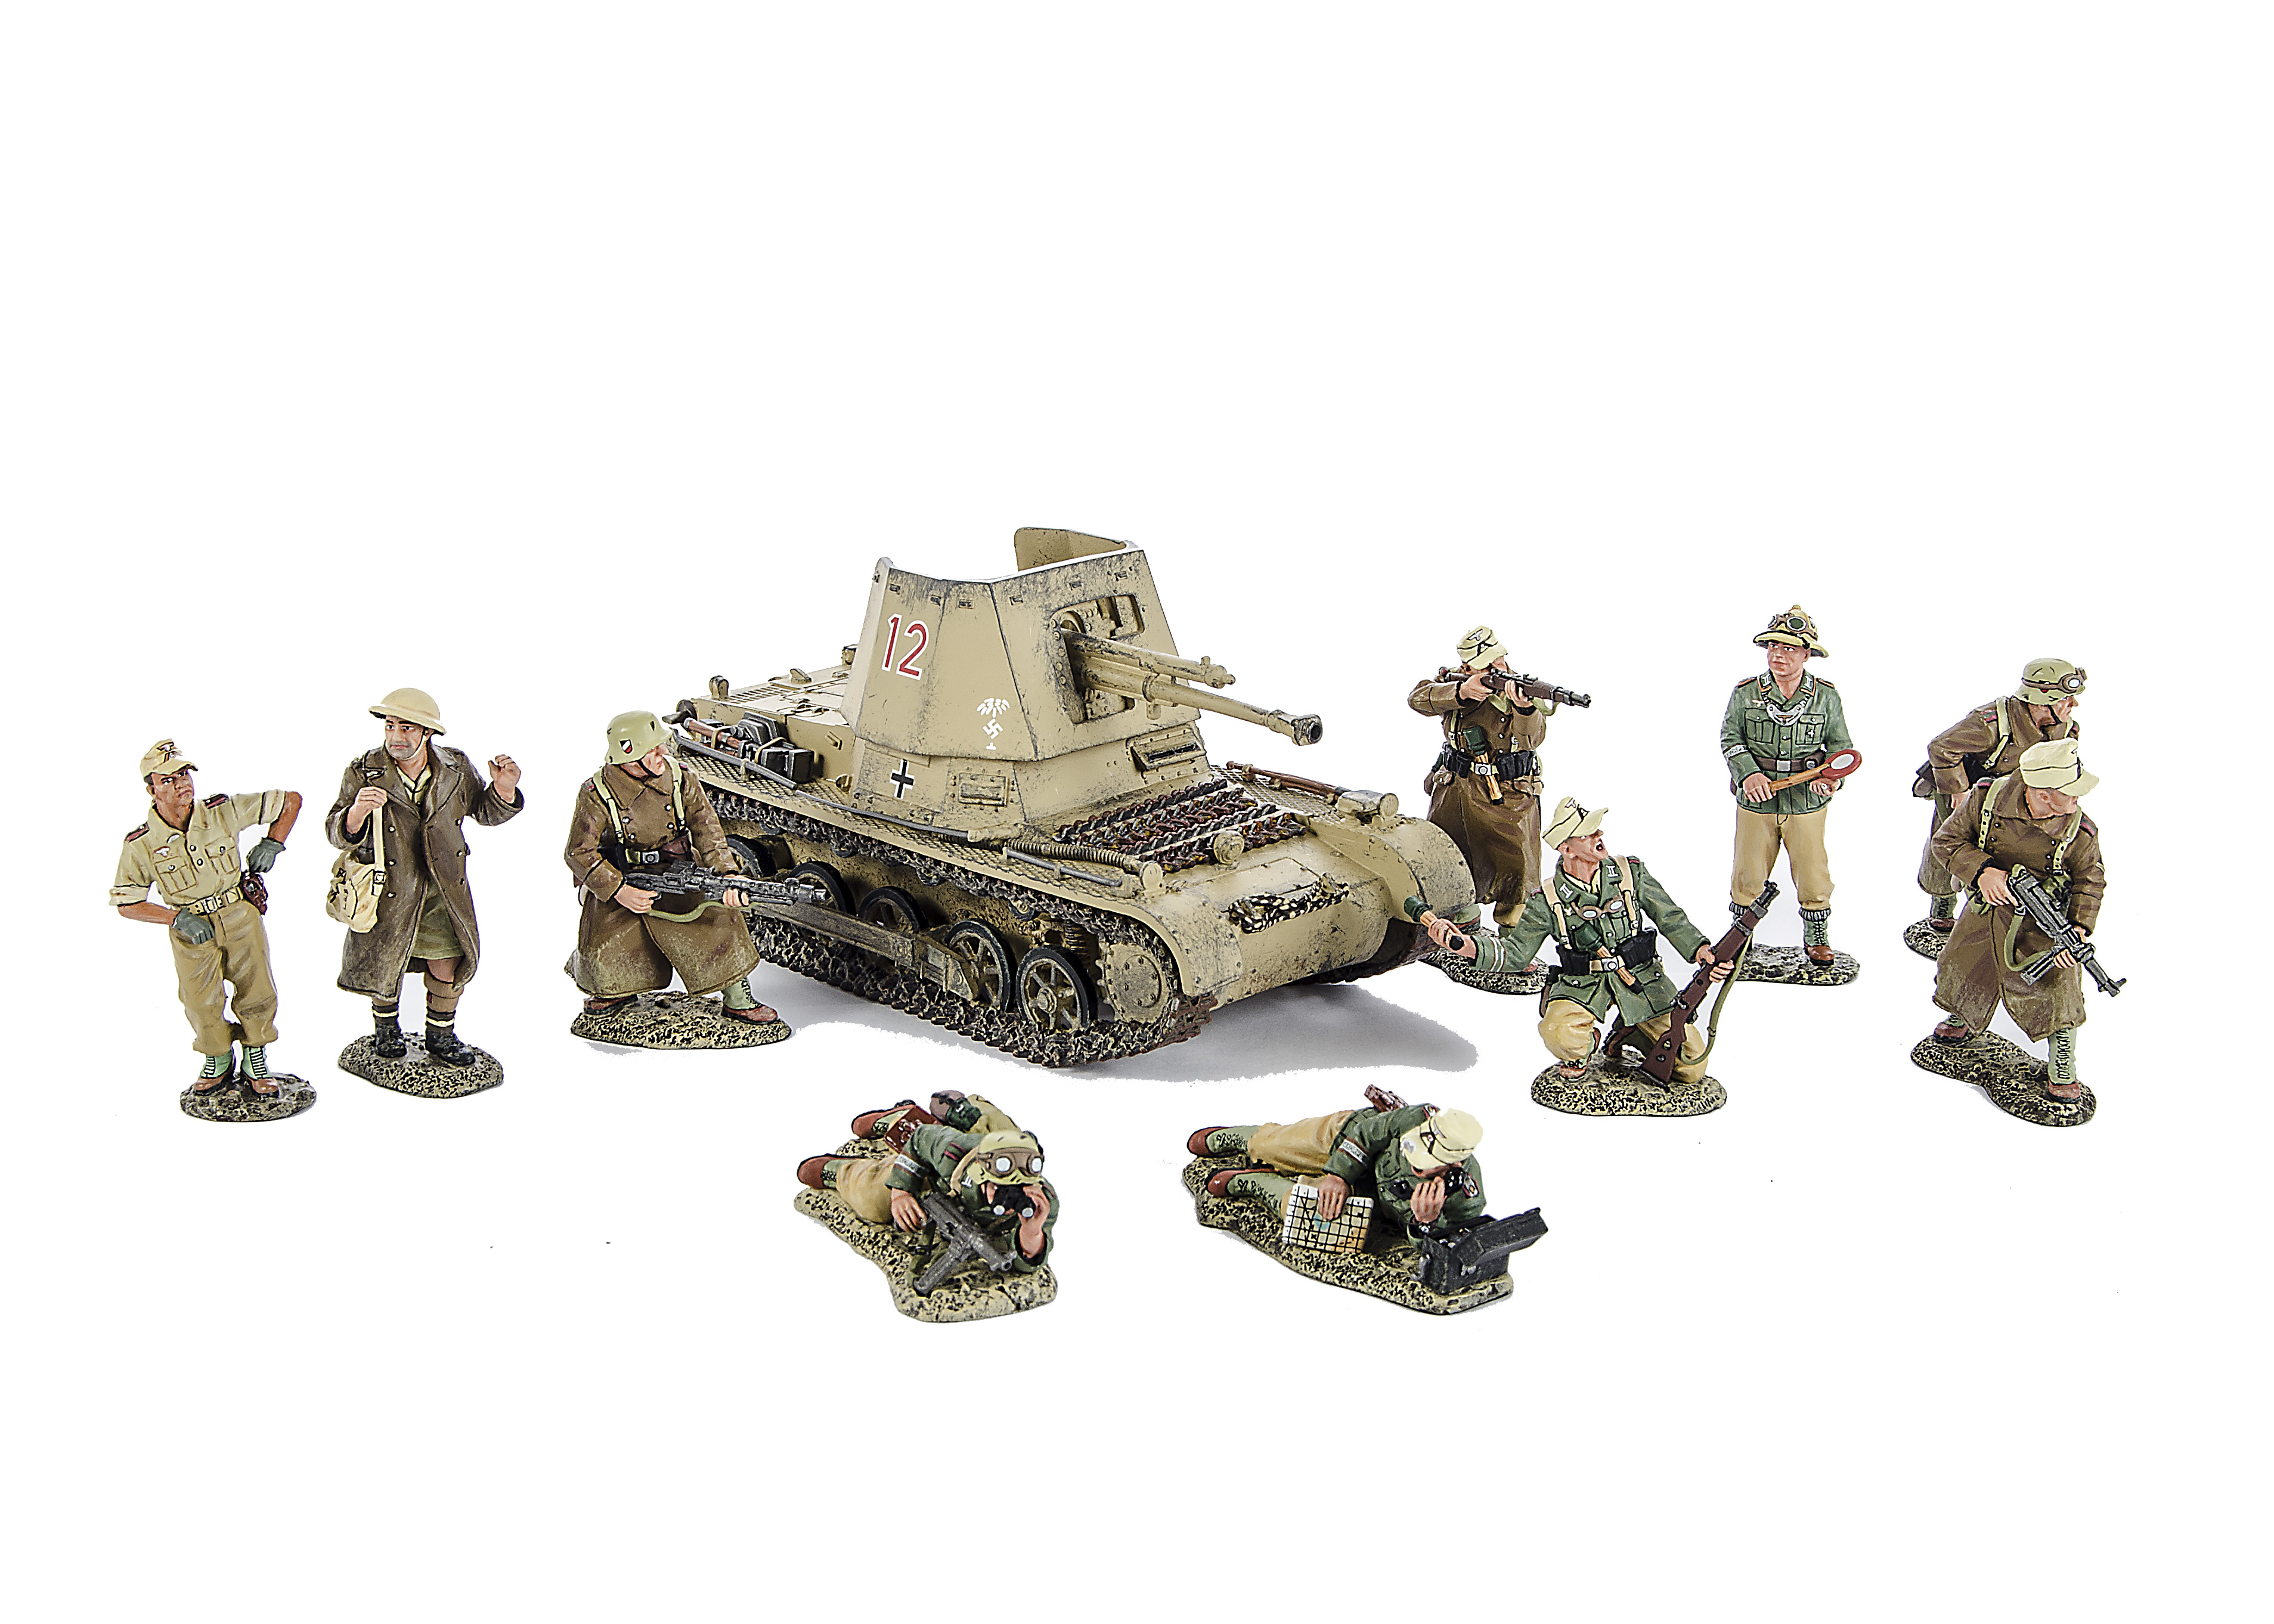 King & Country Afrika Korps AK84 Panzerjager with crewman, with troops AK76, 78, 79, 80, 81, 82